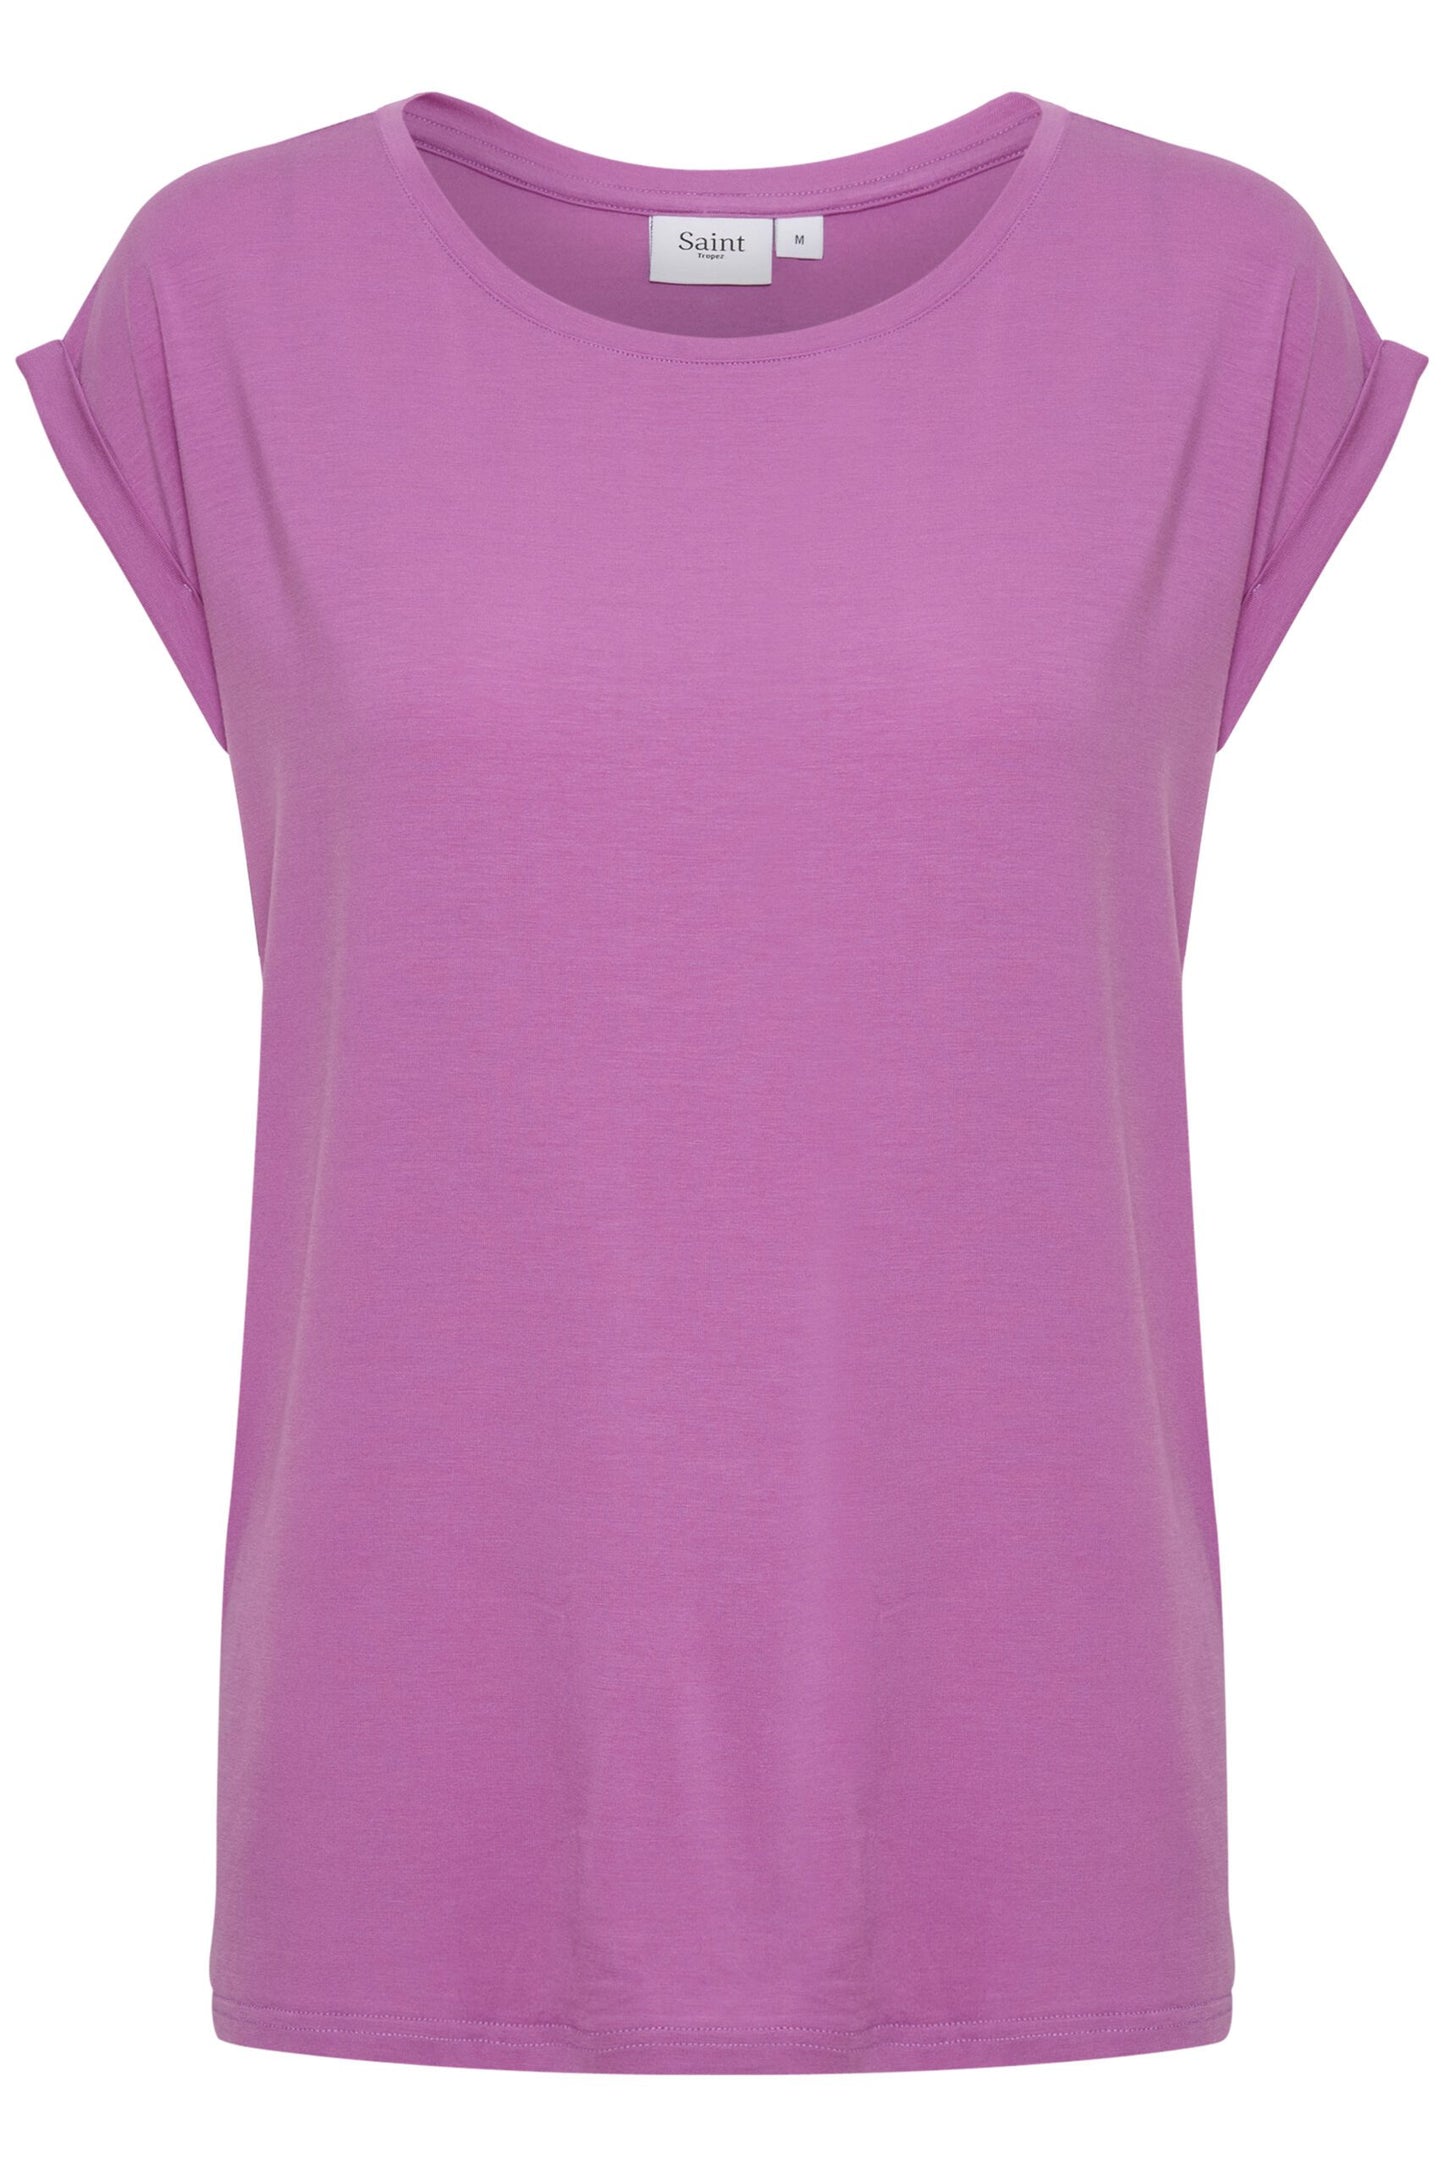 Adelia T-Shirt Radiant Orchid